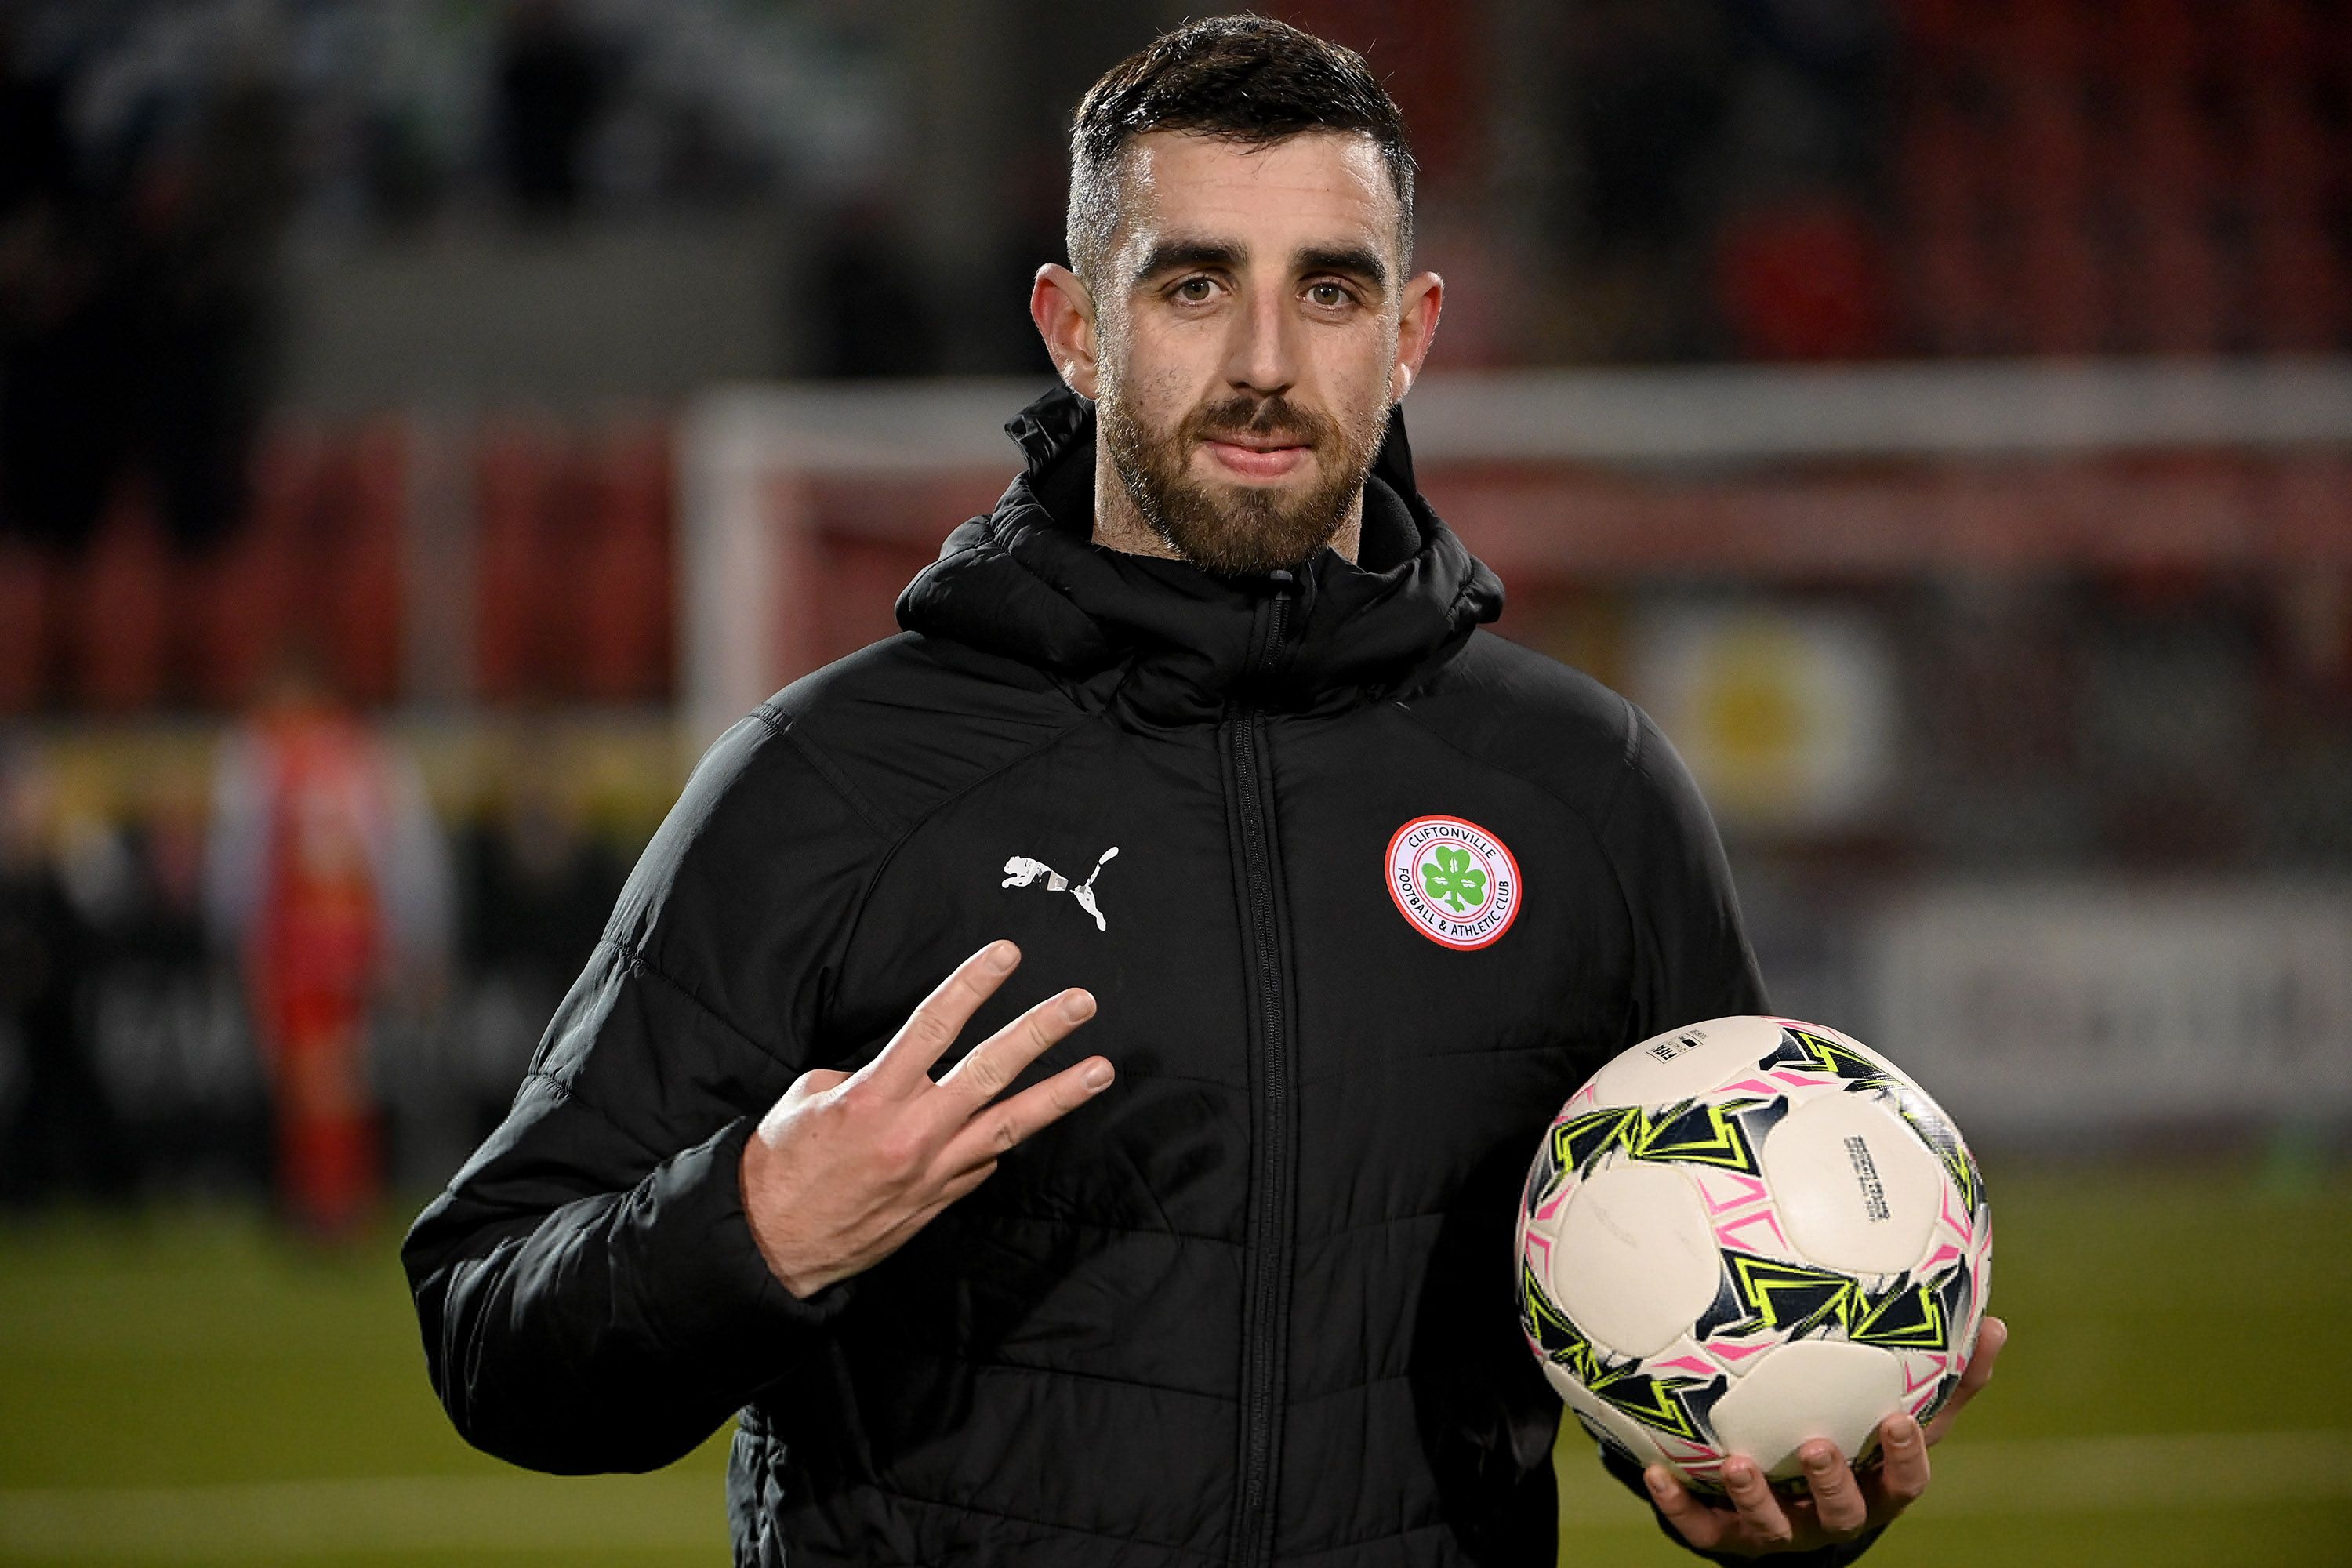 Joe Gormley with the match ball after his hat-trick on Saturday 